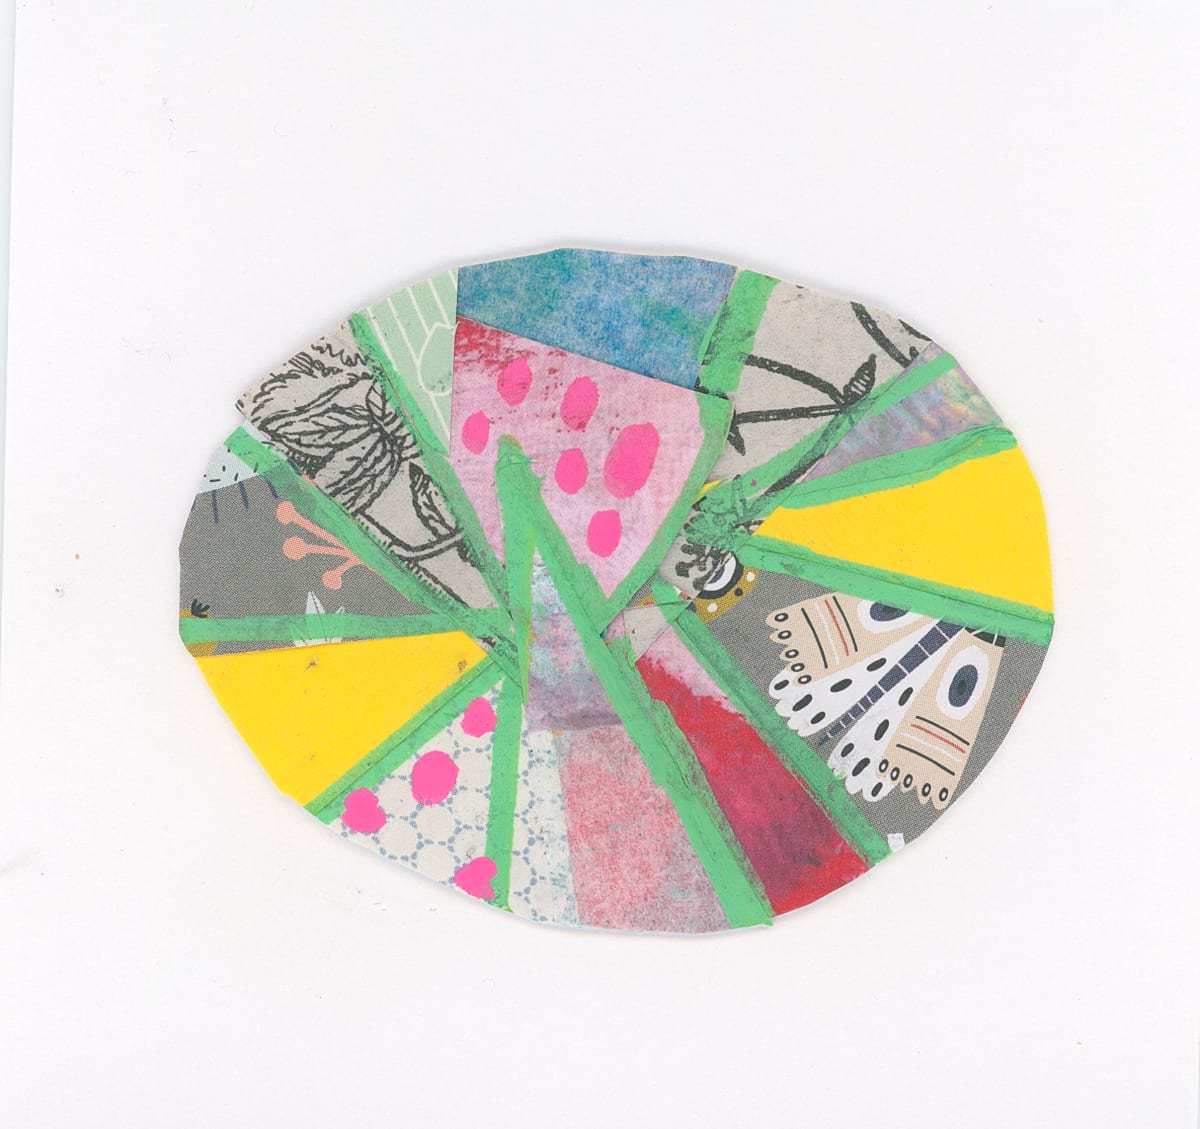 Color Wheel, #3 by Amanda Petrozzini  Image: Hand-cut original mixed media collage, 4 by 4 inches on watercolor paper. 